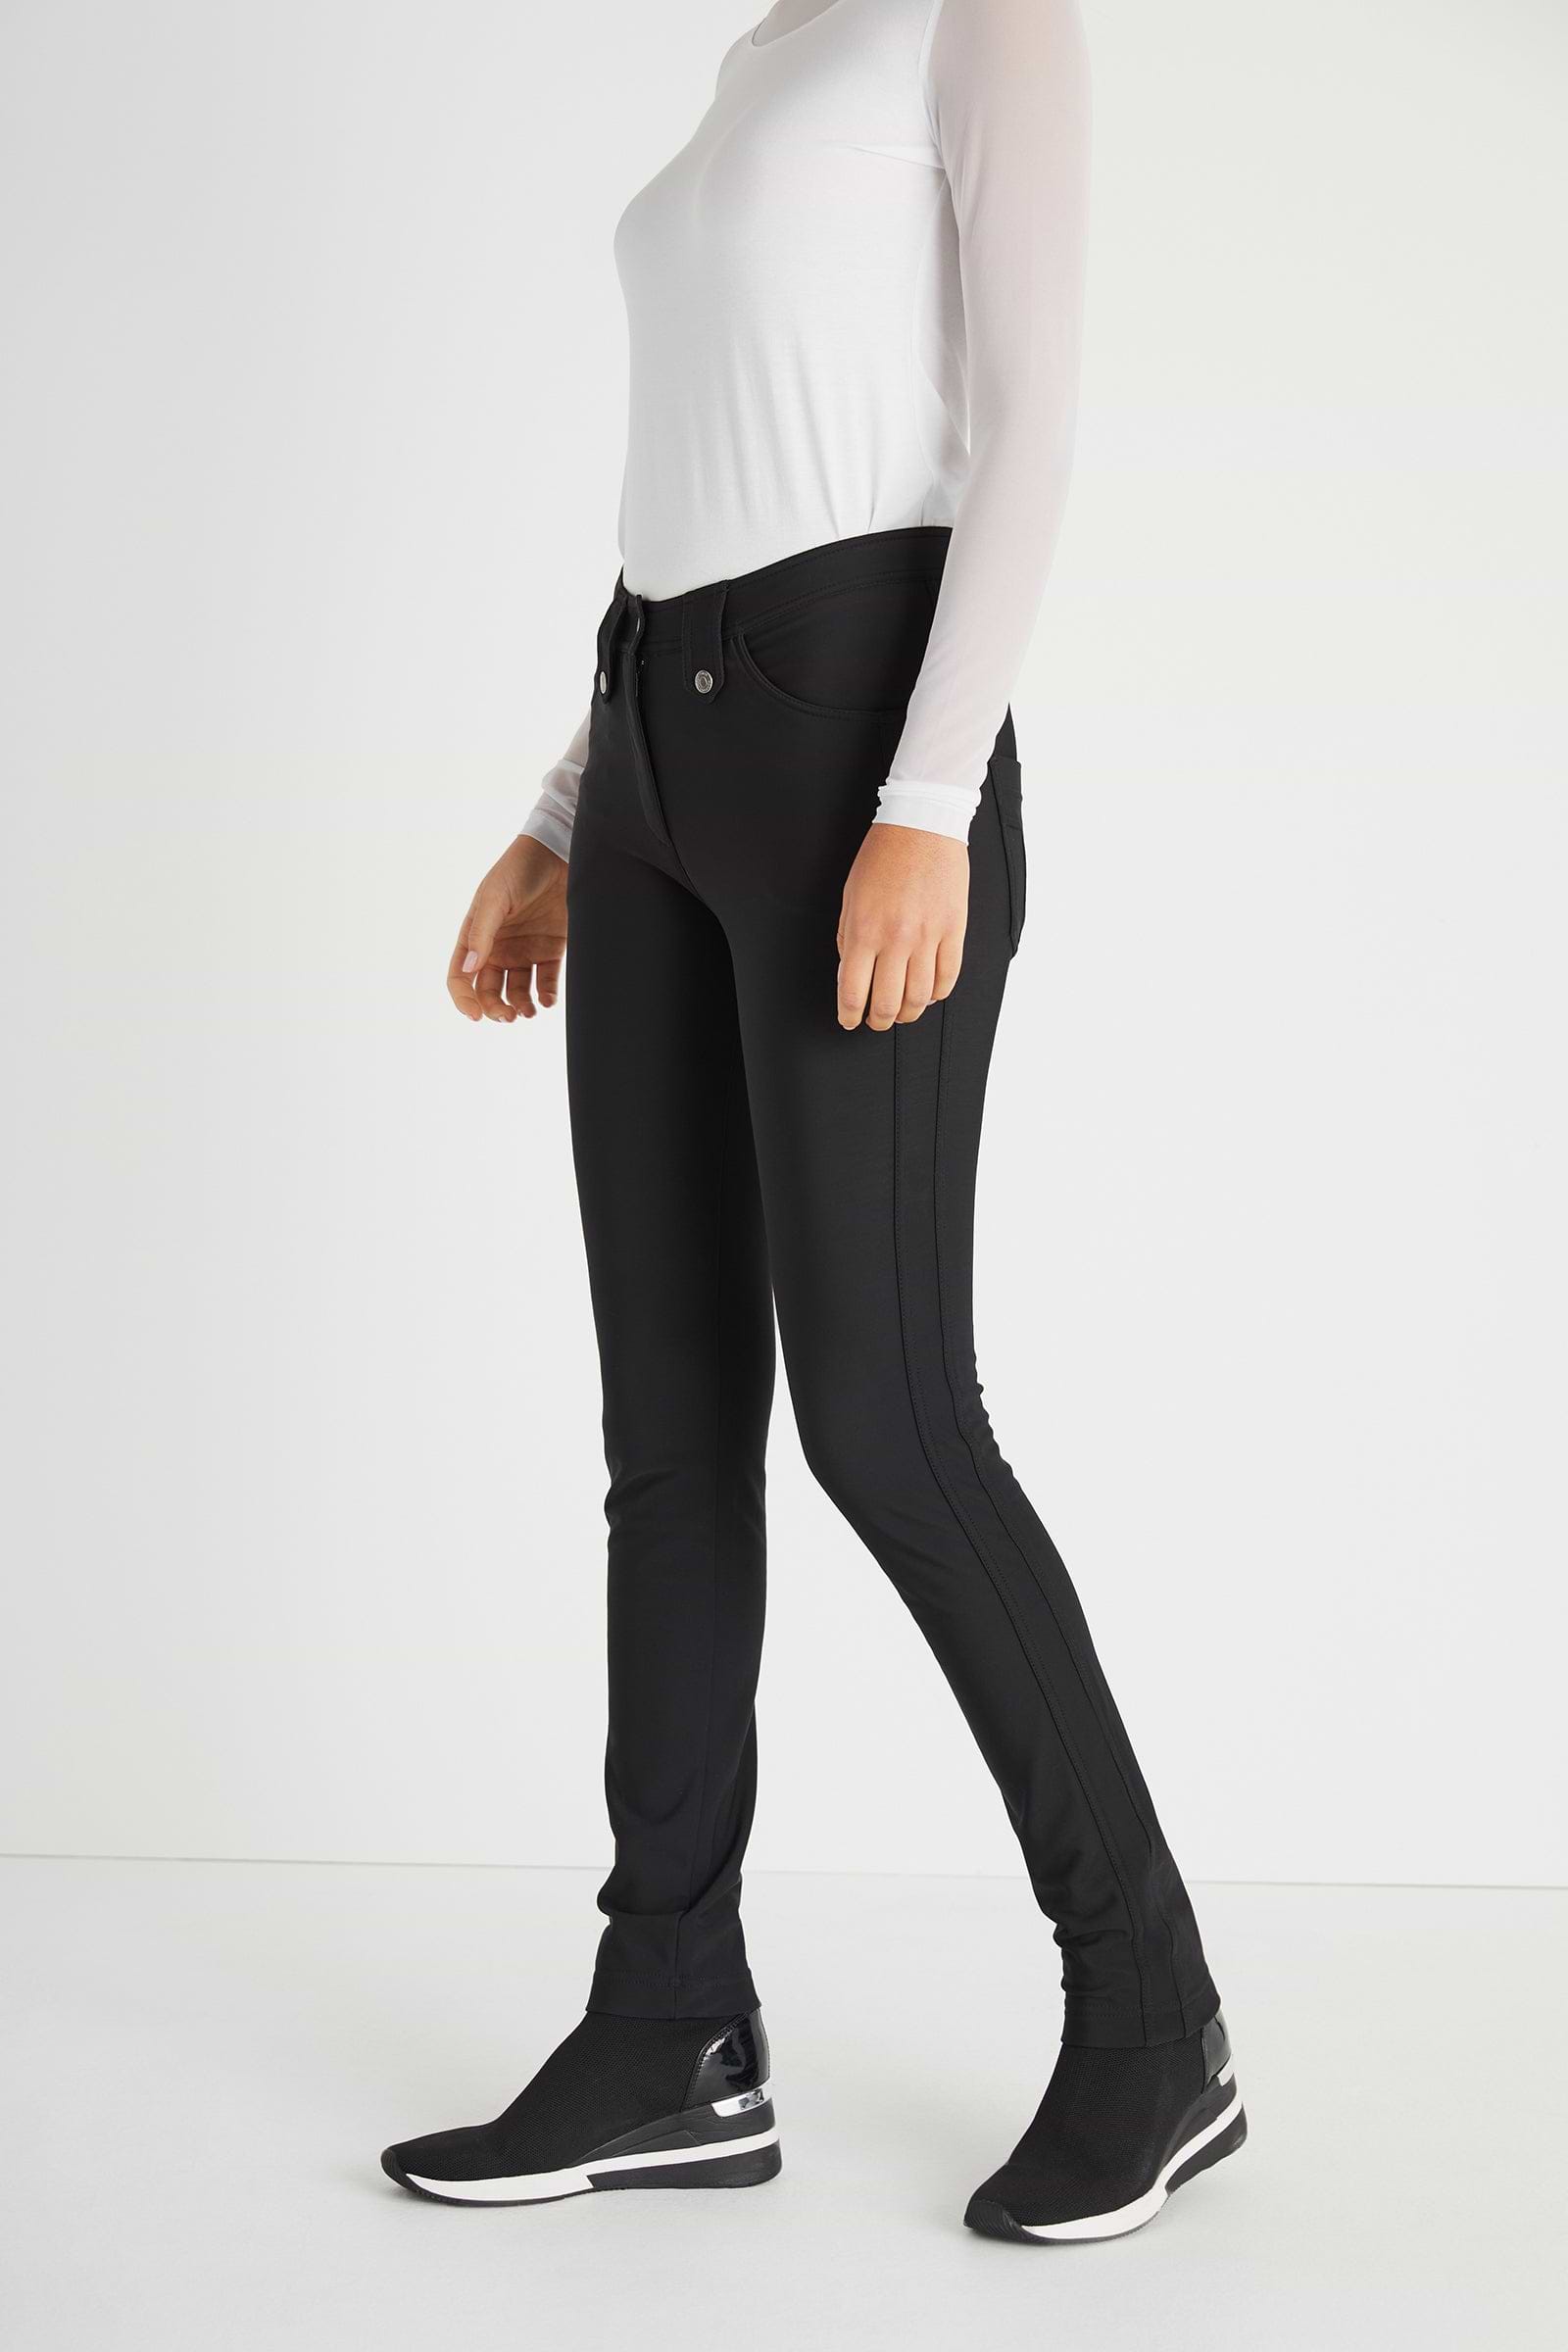 The Best Travel Pants. Side Profile of the Skyler Cozy Fleece-Lined Travel Pant in Black